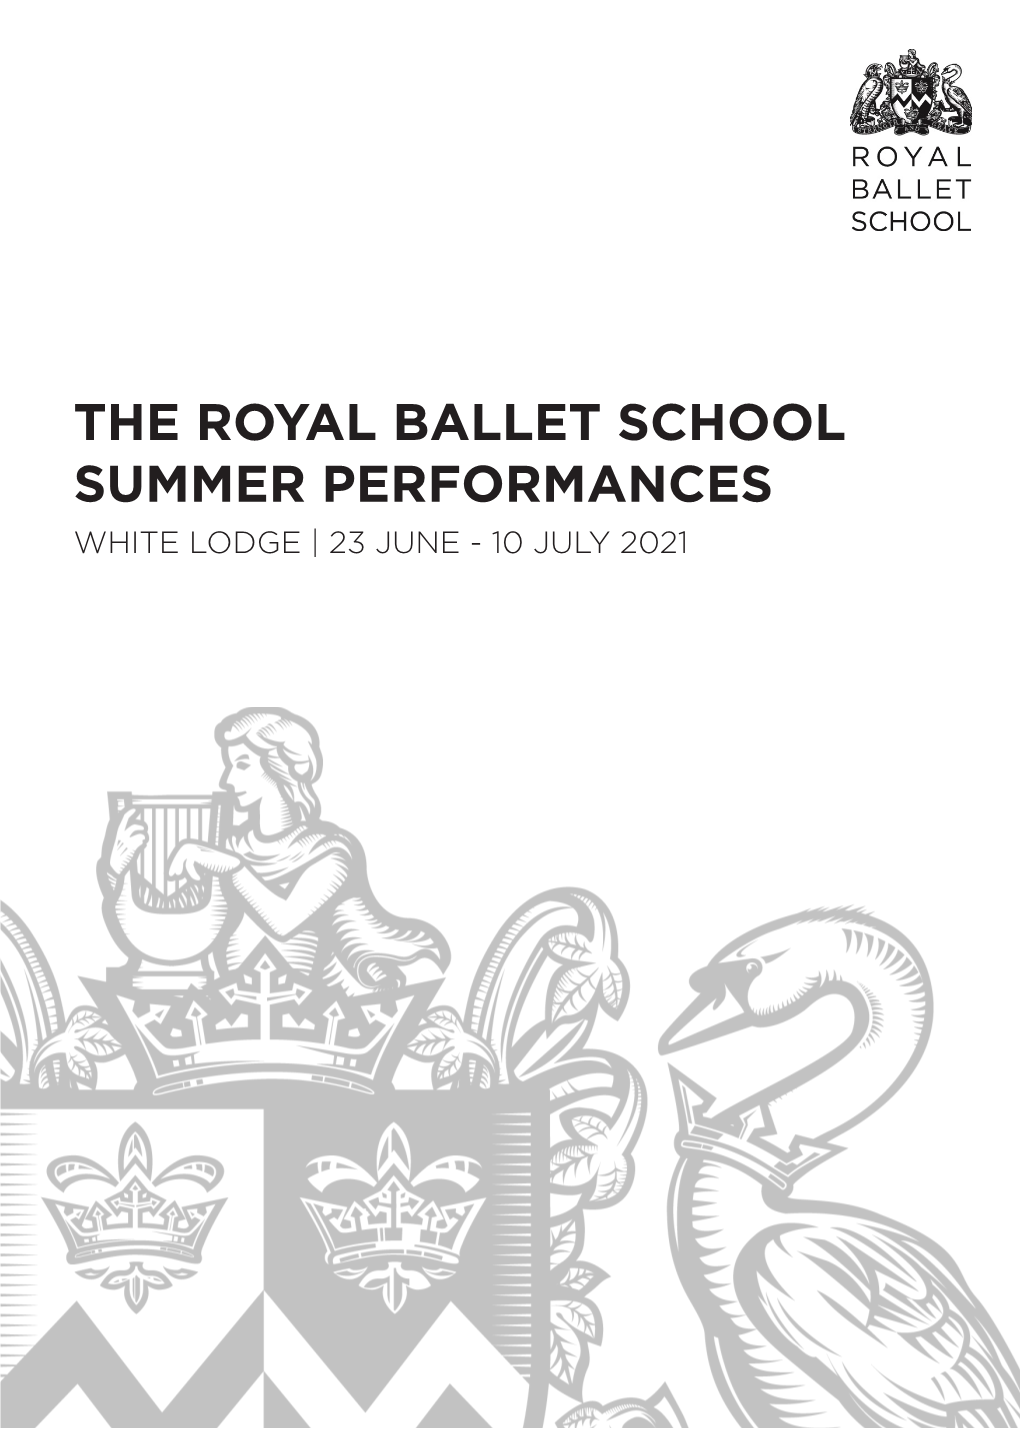 The Royal Ballet School Summer Performances White Lodge | 23 June - 10 July 2021 Welcome